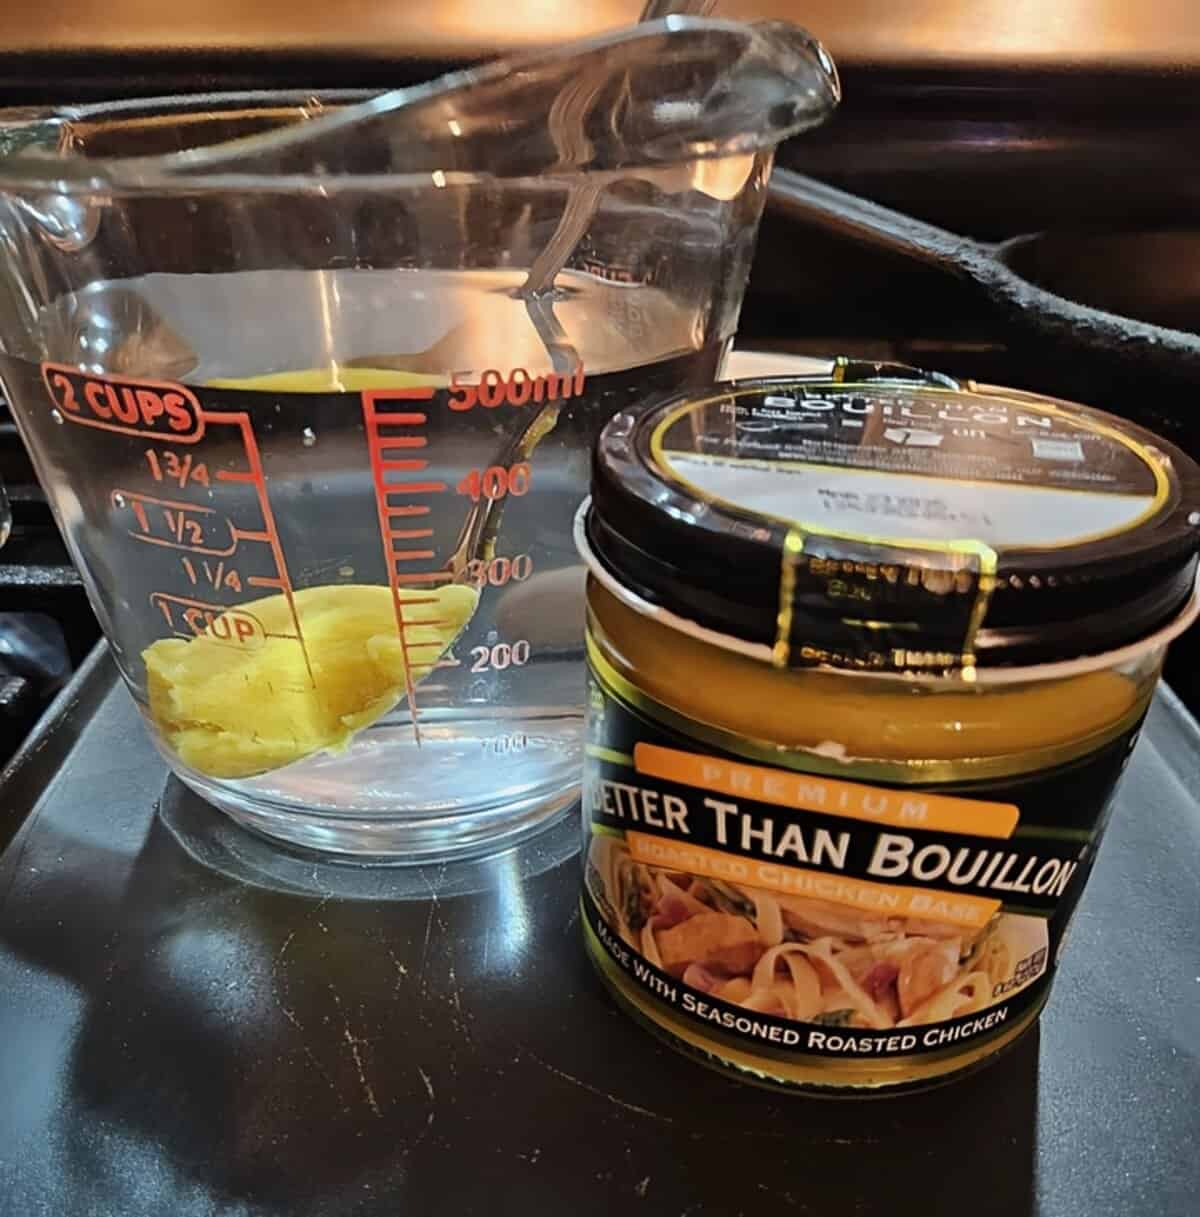 measuring cup filled with water, with a spoonful of chicken bouillon submerged in it. jar of bouillon in foreground.